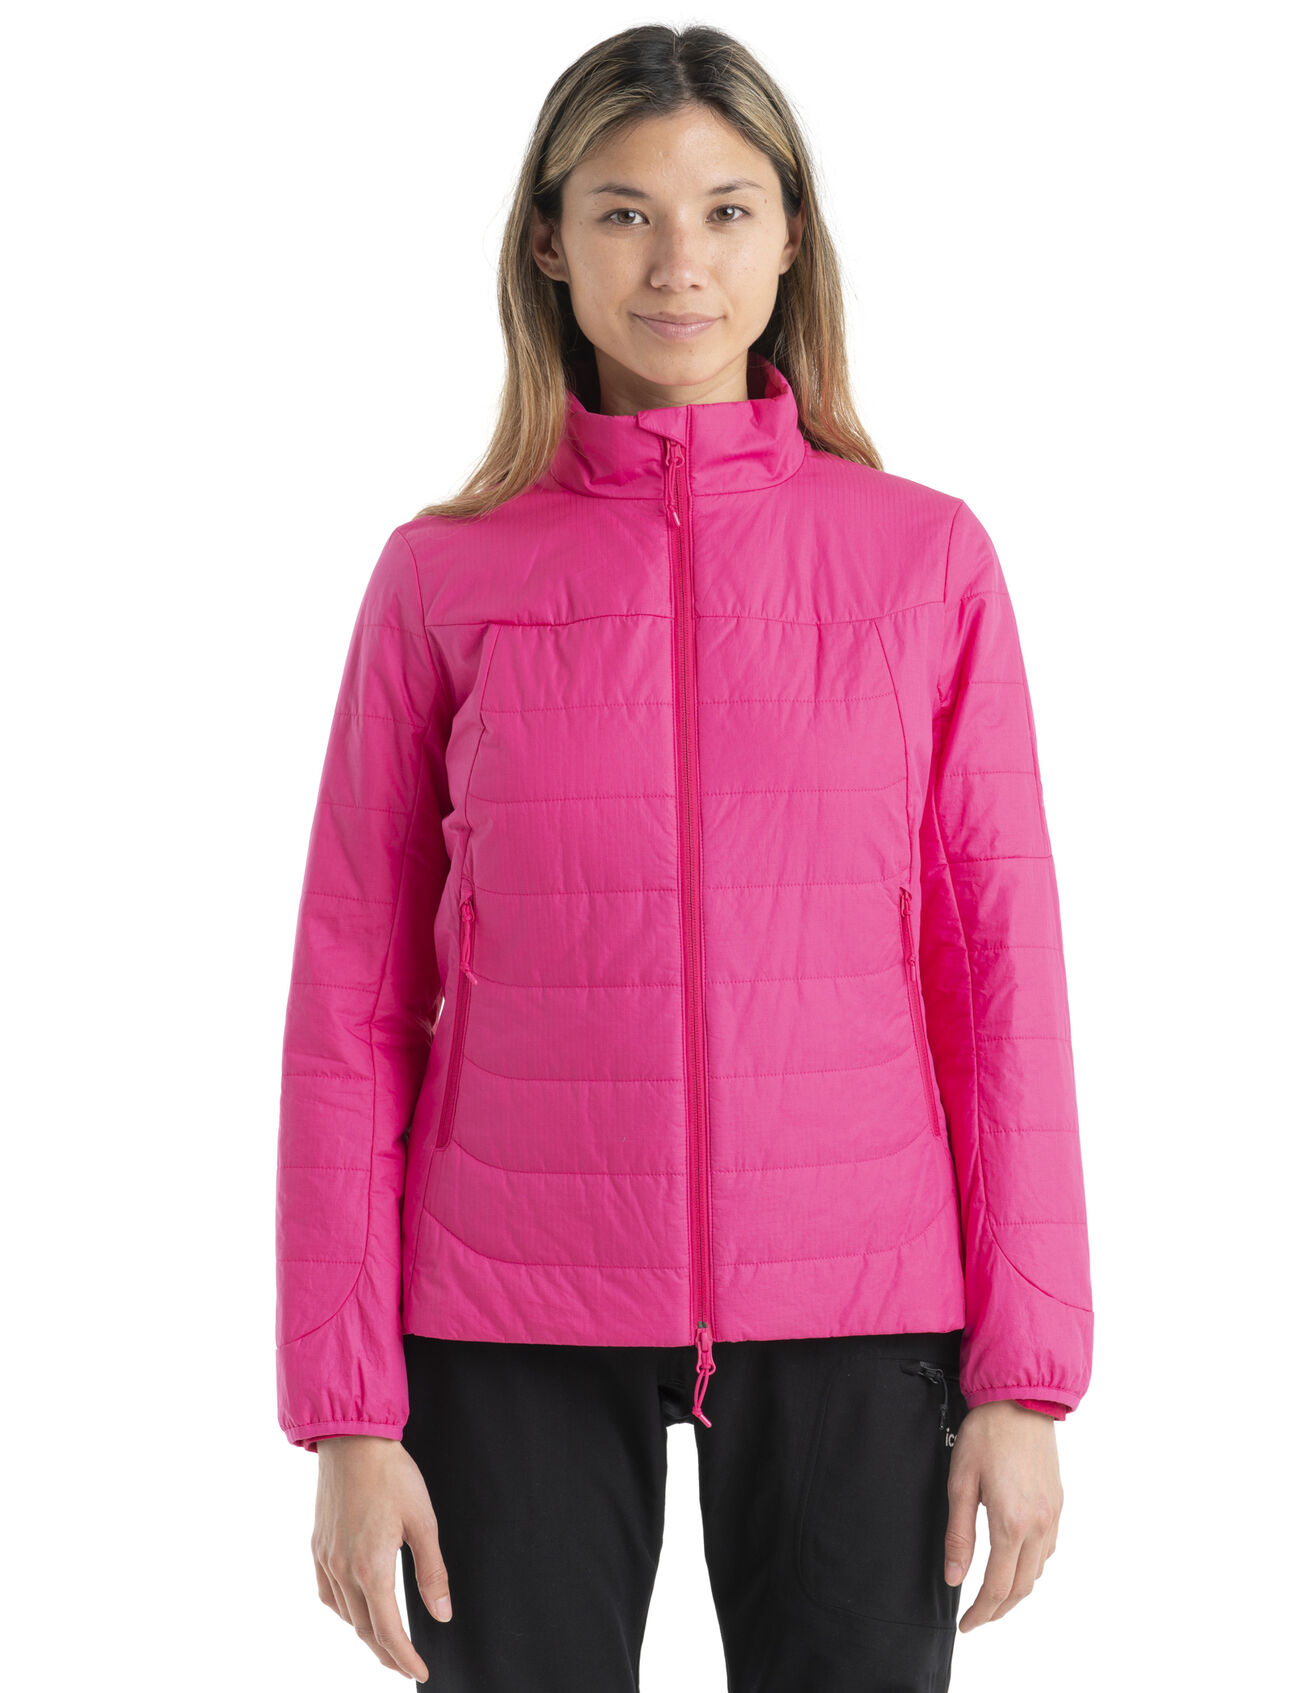 Womens MerinoLoft™ Jacket The perfect insulating layer for skiing or hiking in cold conditions, the MerinoLoft™ Jacket features our innovative MerinoLoft™ insulation—a natural and cruelty-free insulation that harnesses the natural benefits of merino wool.